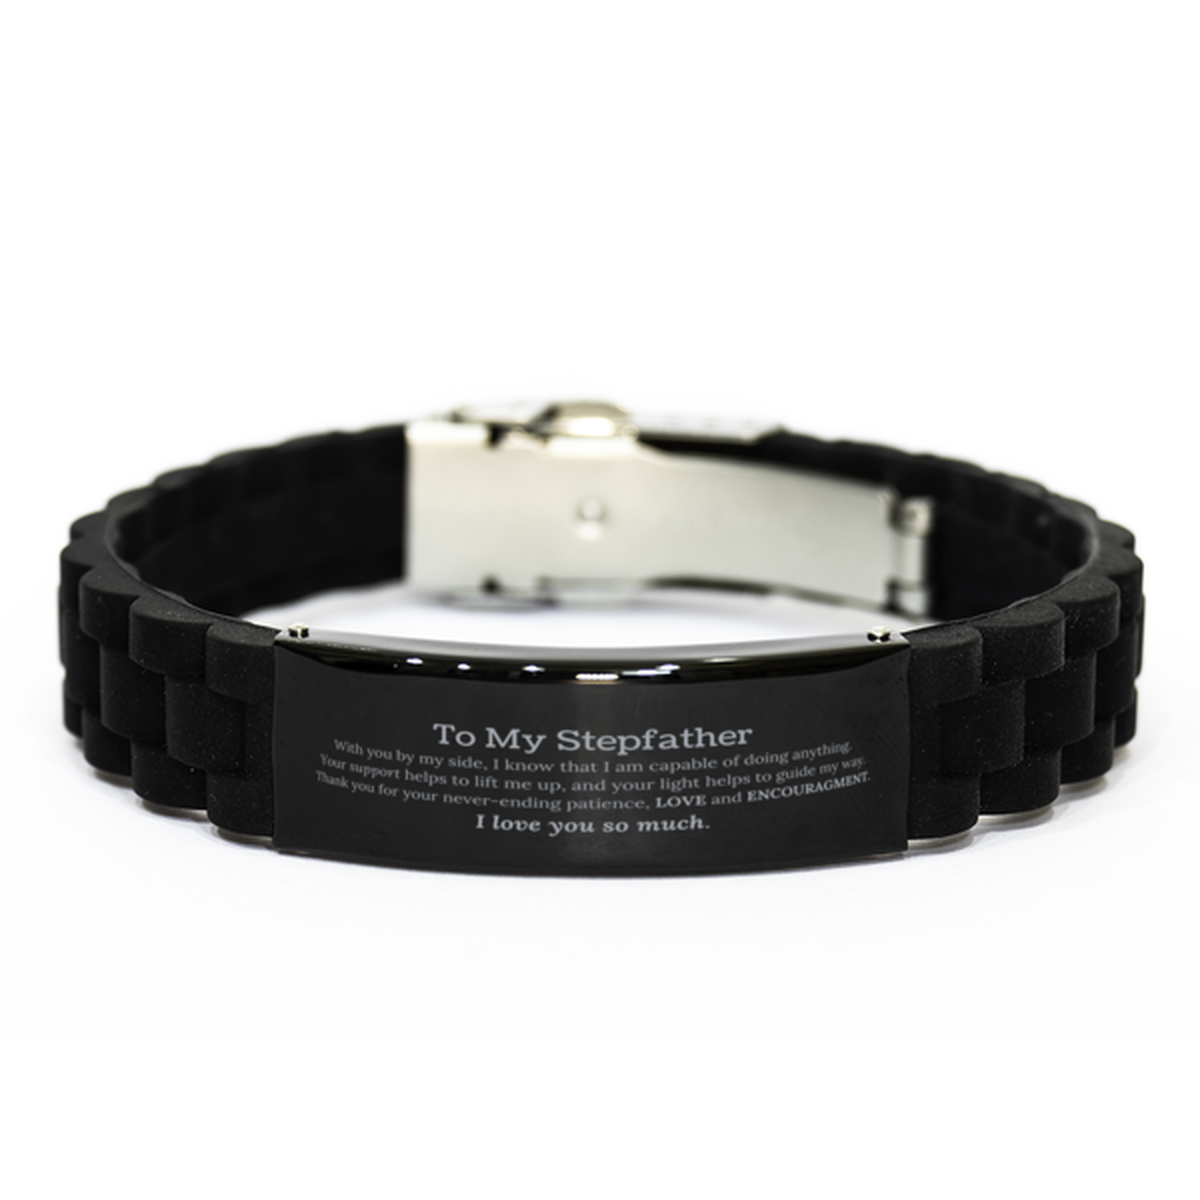 Appreciation Stepfather Black Glidelock Clasp Bracelet Gifts, To My Stepfather Birthday Christmas Wedding Keepsake Gifts for Stepfather With you by my side, I know that I am capable of doing anything. I love you so much